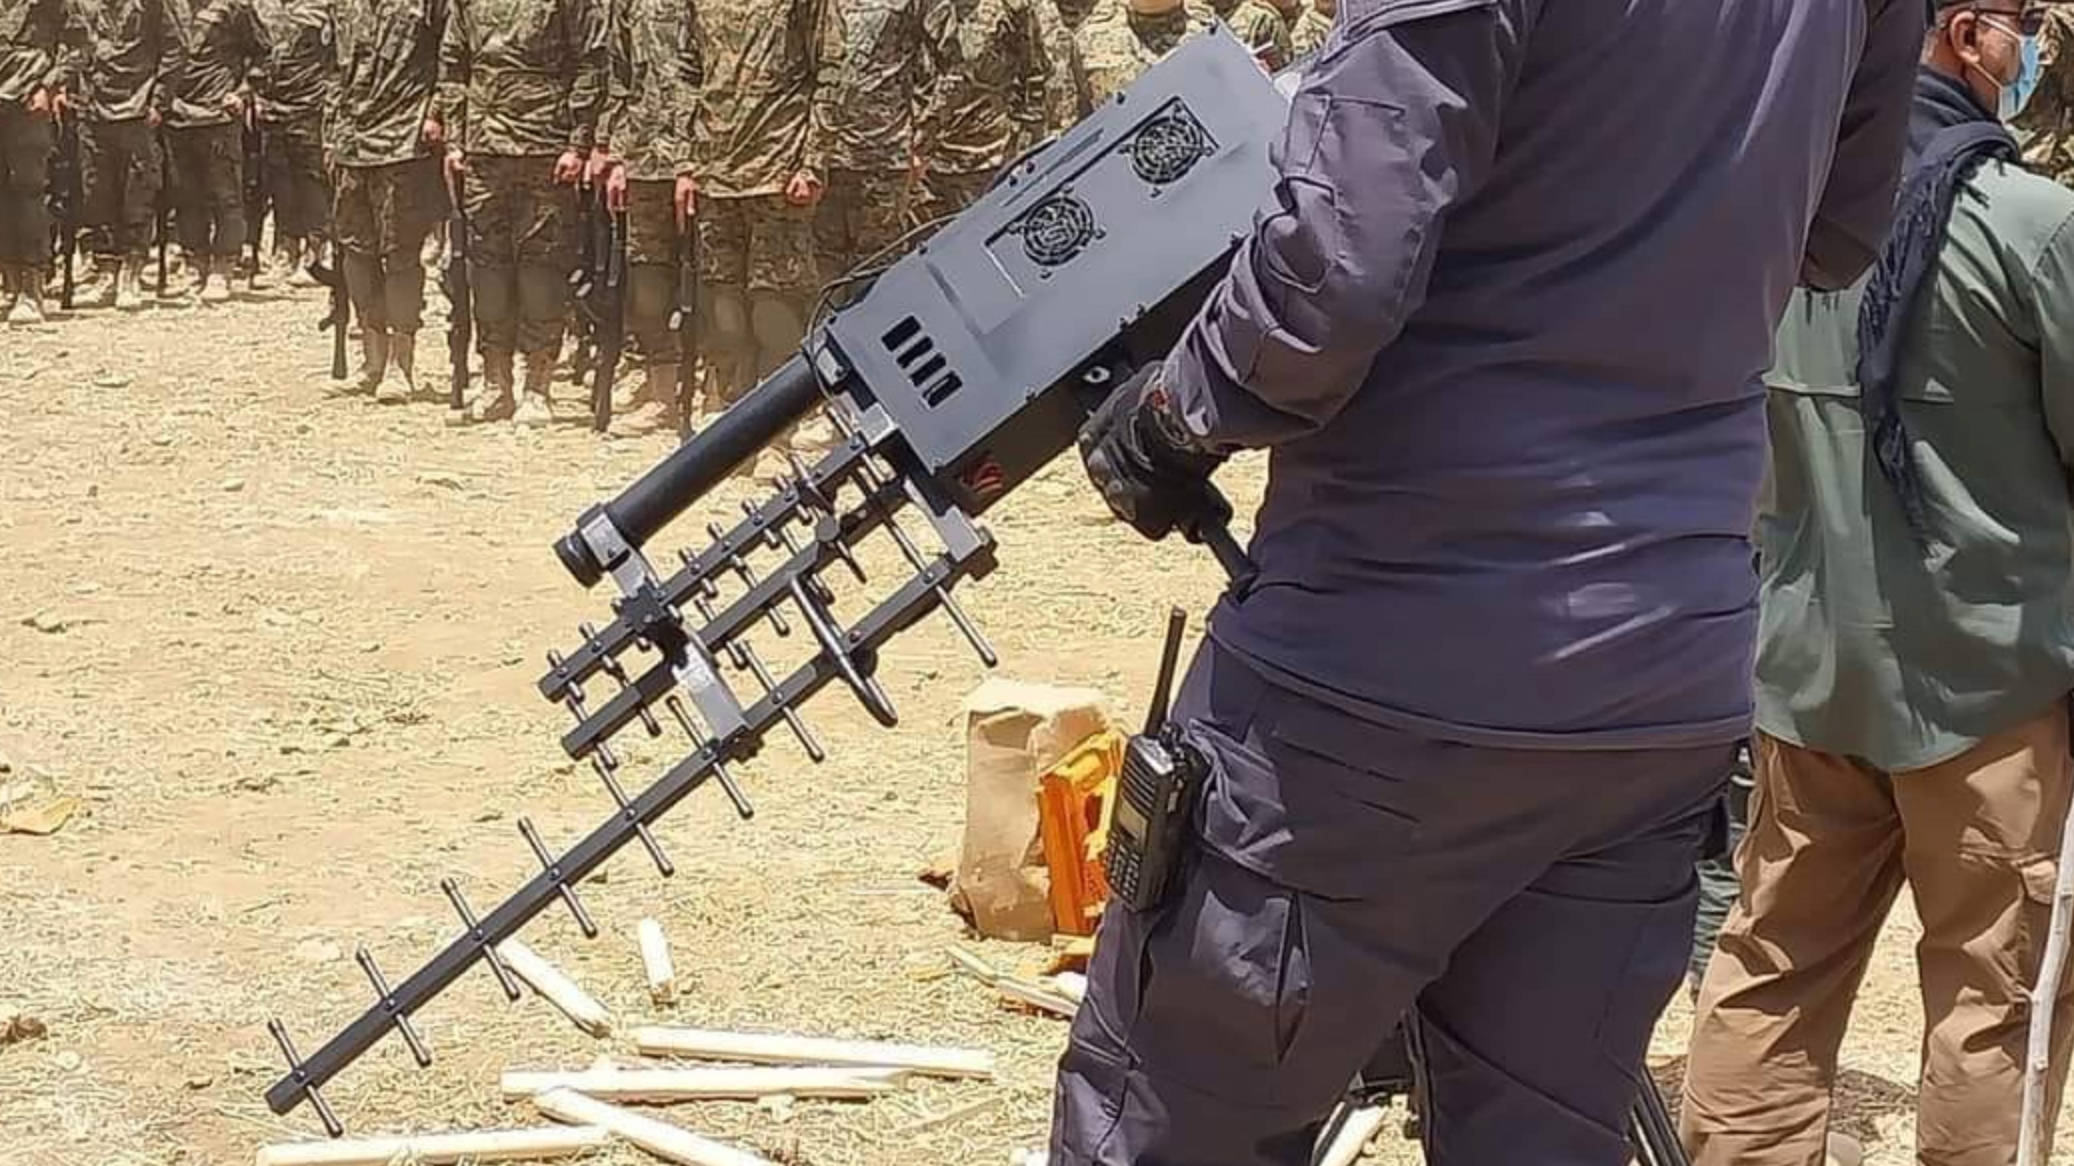 A Hezbollah fighter holds one of two anti-drone guns unveiled at the military show (Manar)